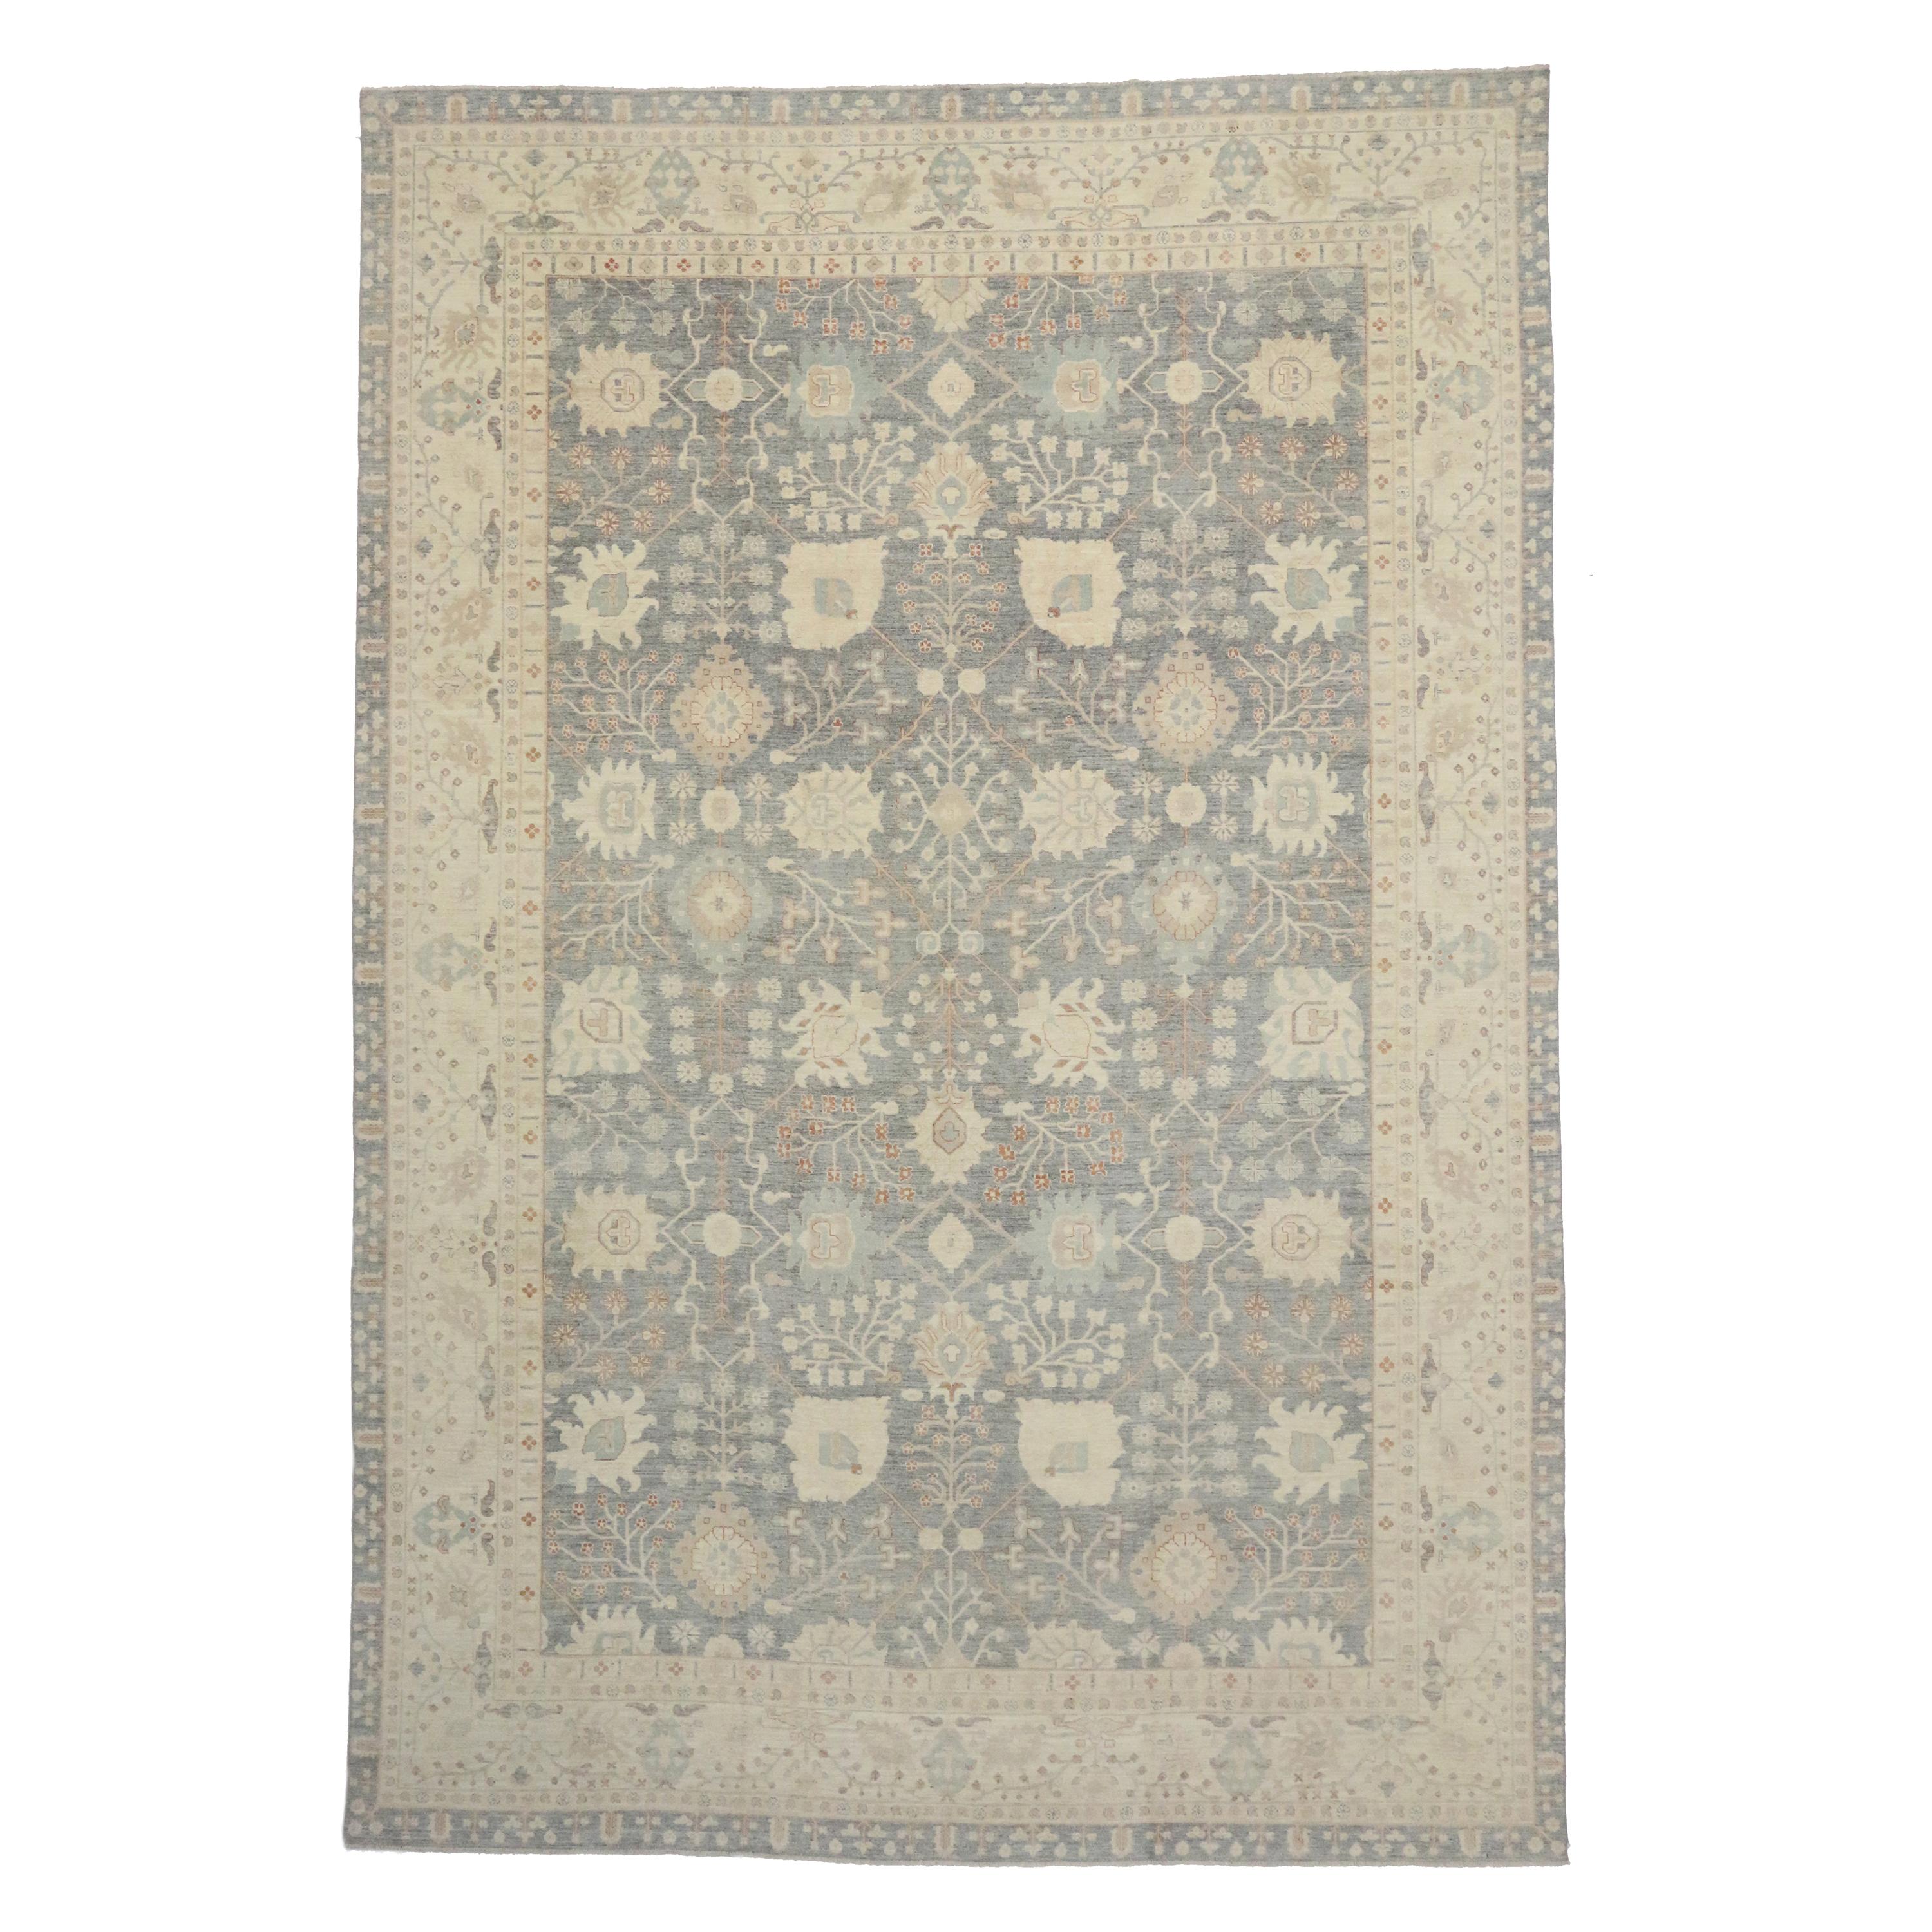 New Contemporary Oushak Palace Size Rug with Neoclassic Transitional Style For Sale